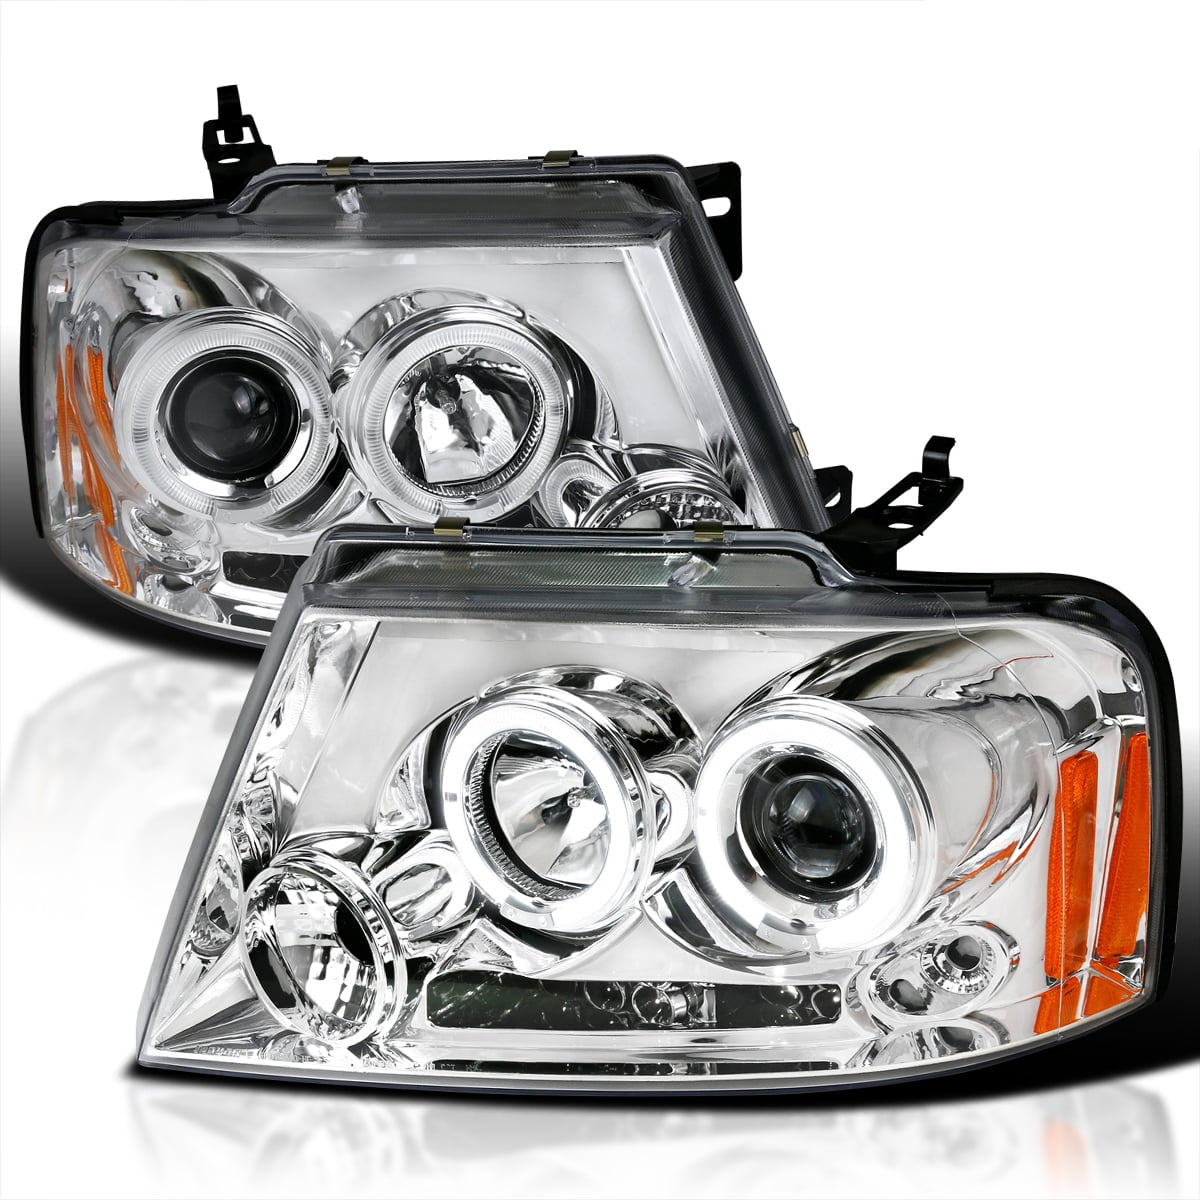 Spec-D Tuning X Chrome Housing Clear Lens Projector Headlights